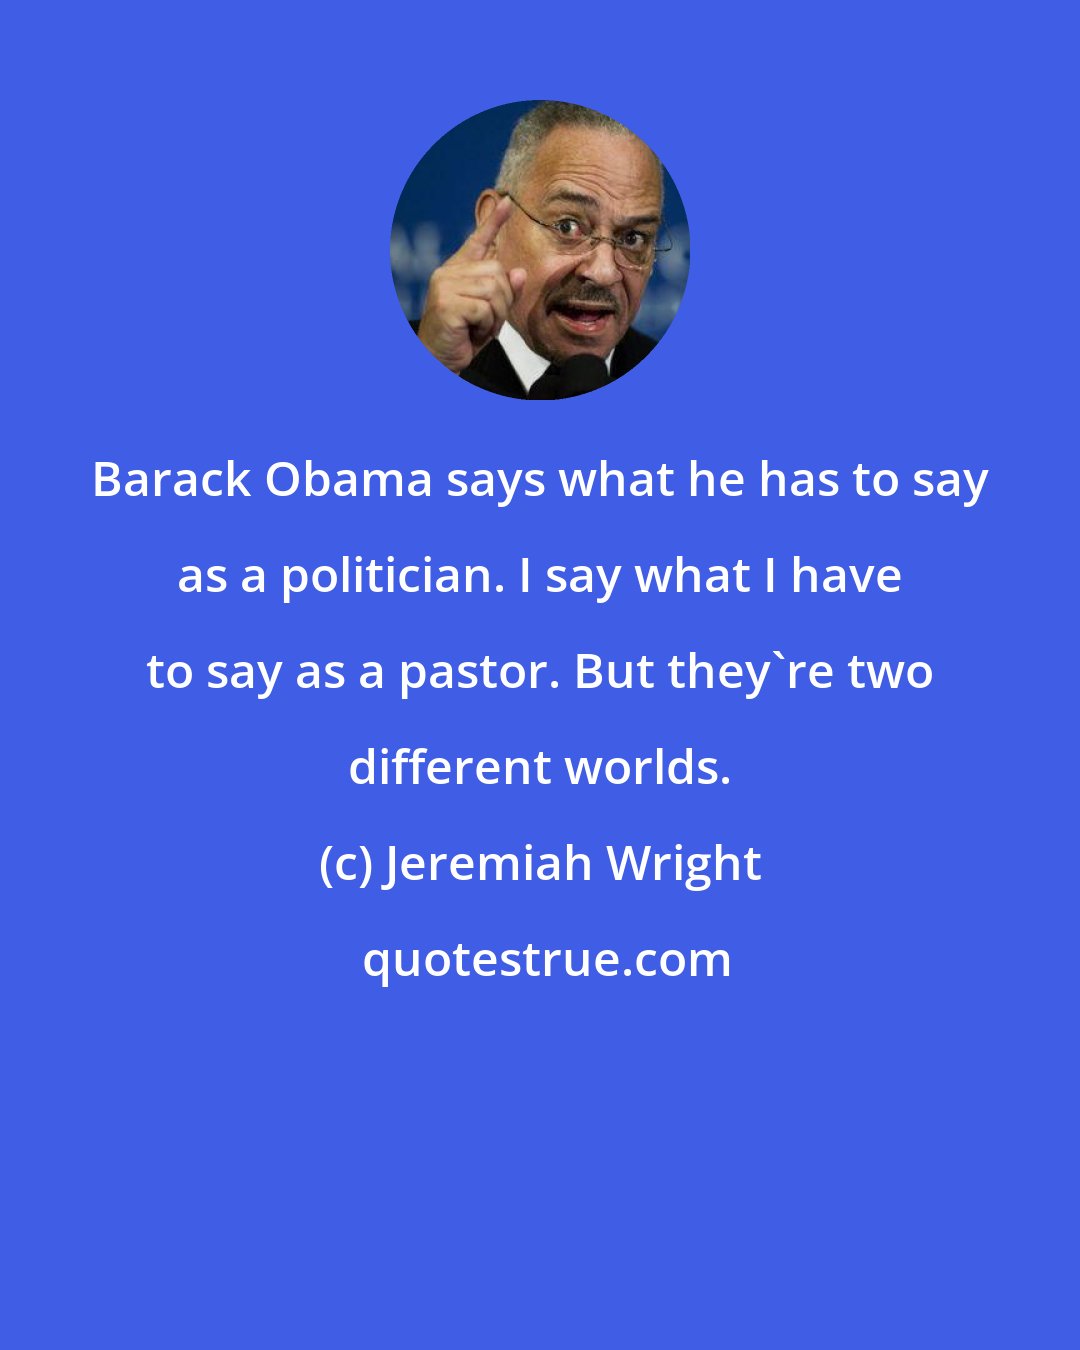 Jeremiah Wright: Barack Obama says what he has to say as a politician. I say what I have to say as a pastor. But they're two different worlds.